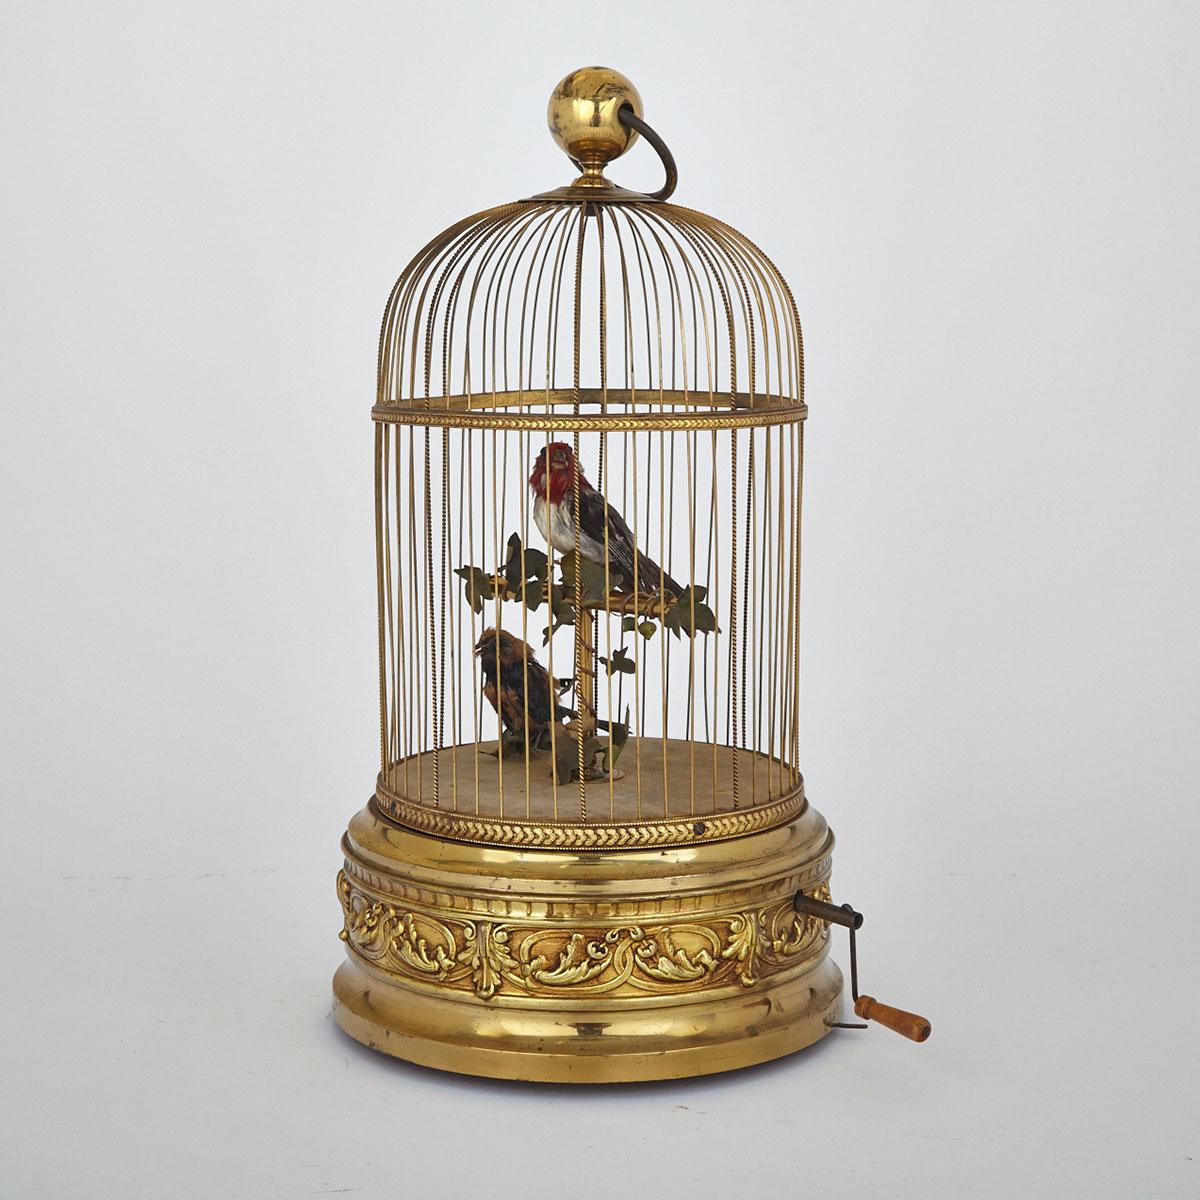 French Automaton Singing Birds in Gilded Cage, early 20th century